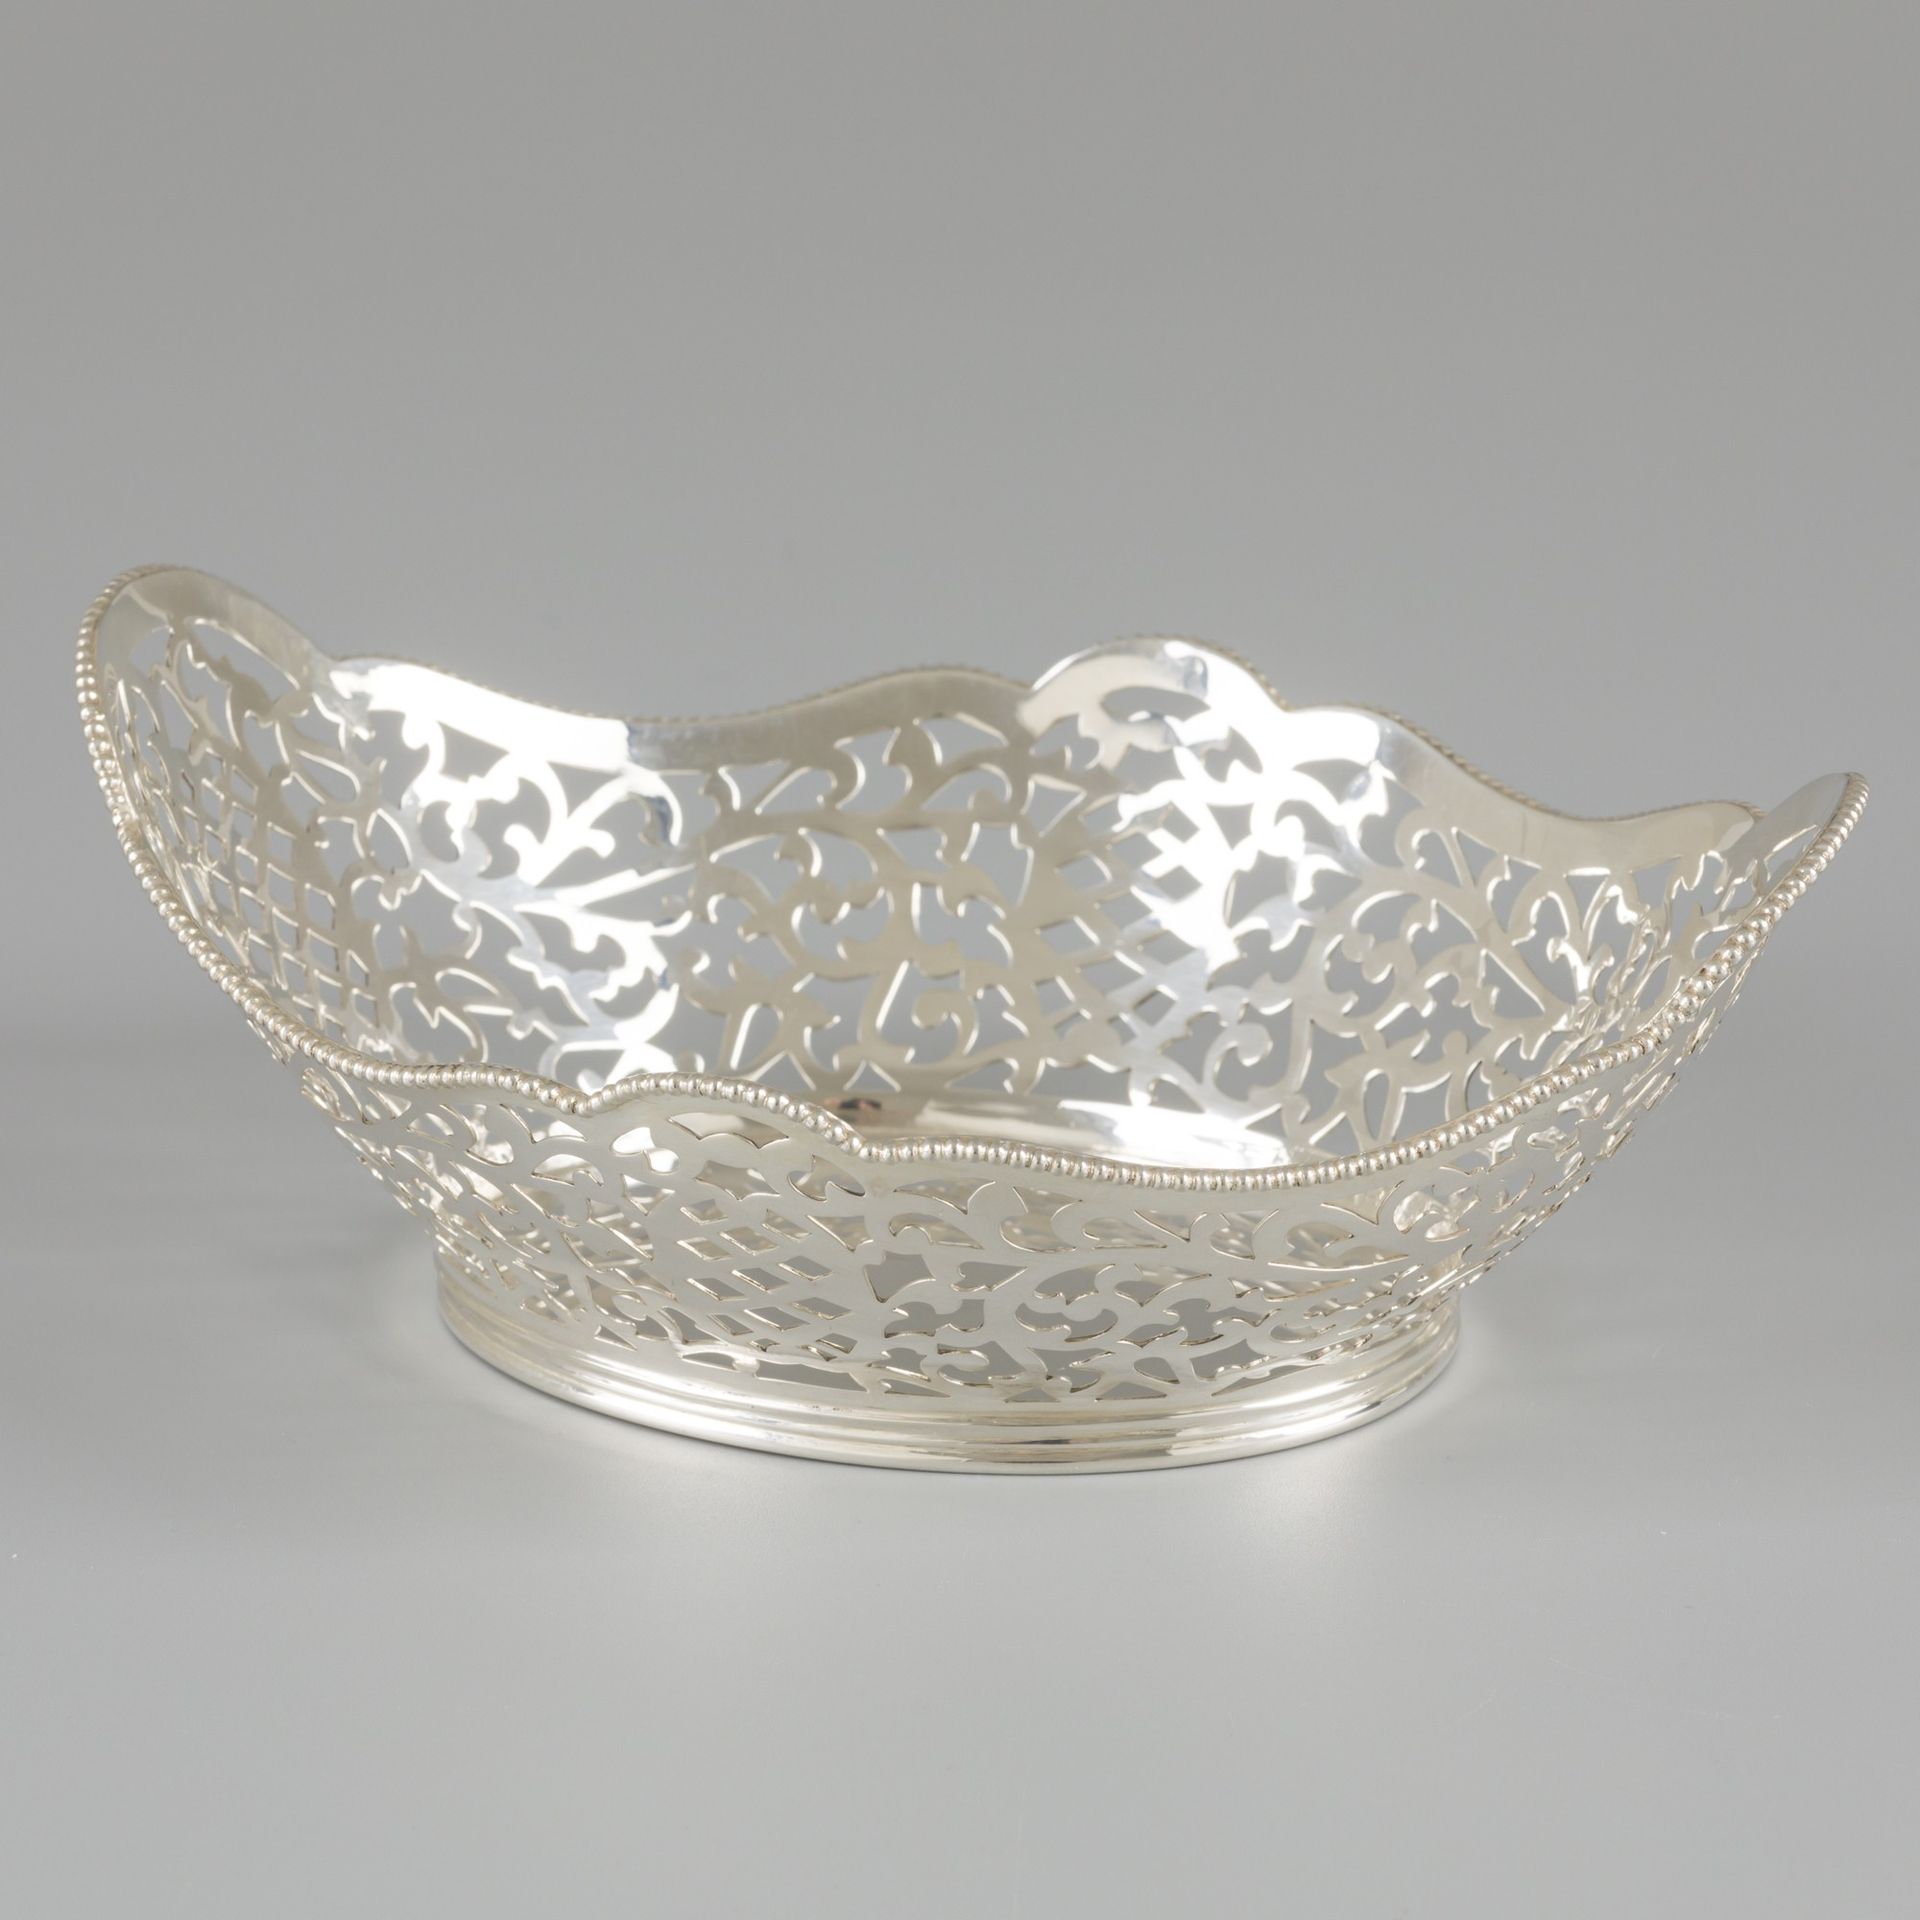 Puff Pastry basket silver. Oval model with openwork sides, soldered pearl rim an&hellip;